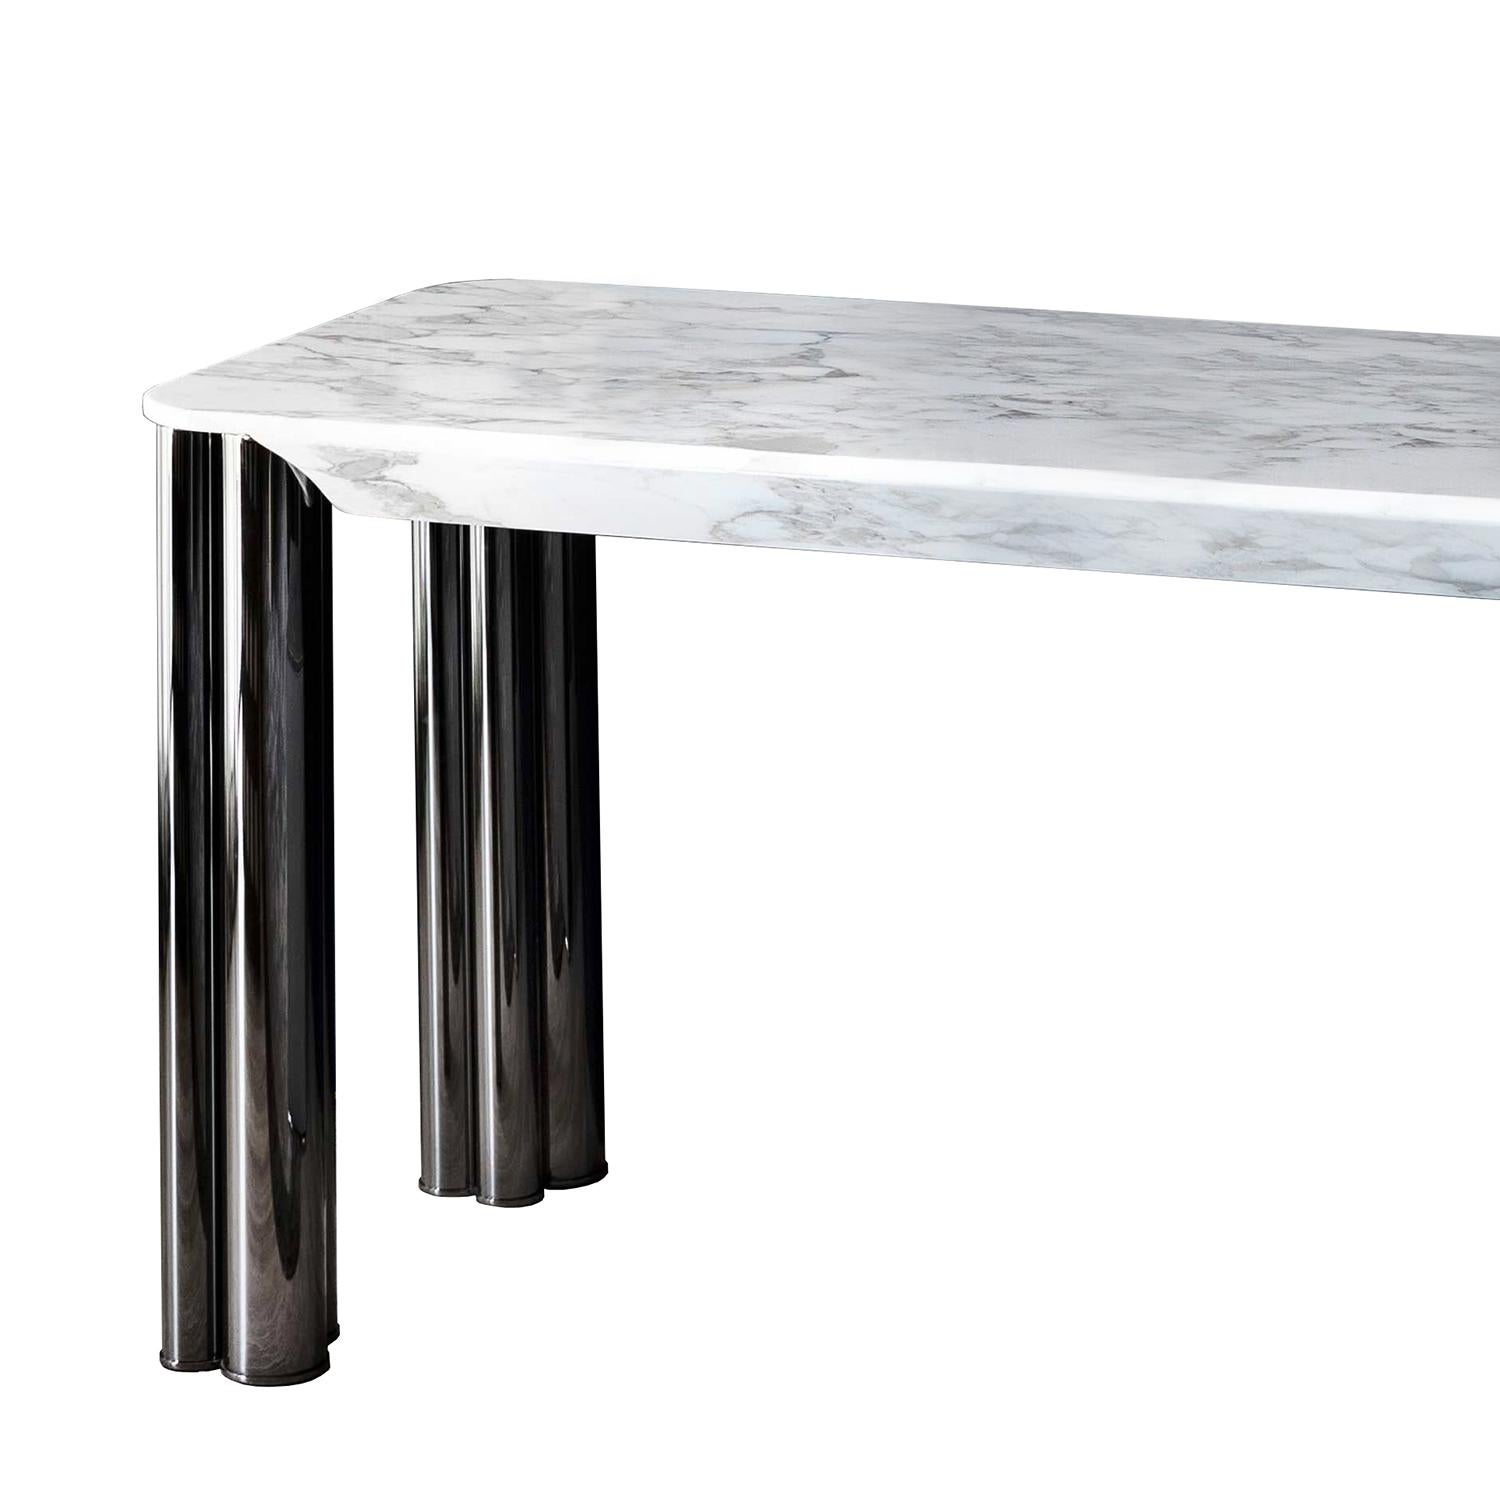 Console table Ambra with 4 feet in steel in blackened chrome
finish. With white calacatta oro marble top.
Measures: L 160 x D 60 x H 75cm, price: 17900,00€.
Also available with white valentine grey marble or emperador
marble top or black and